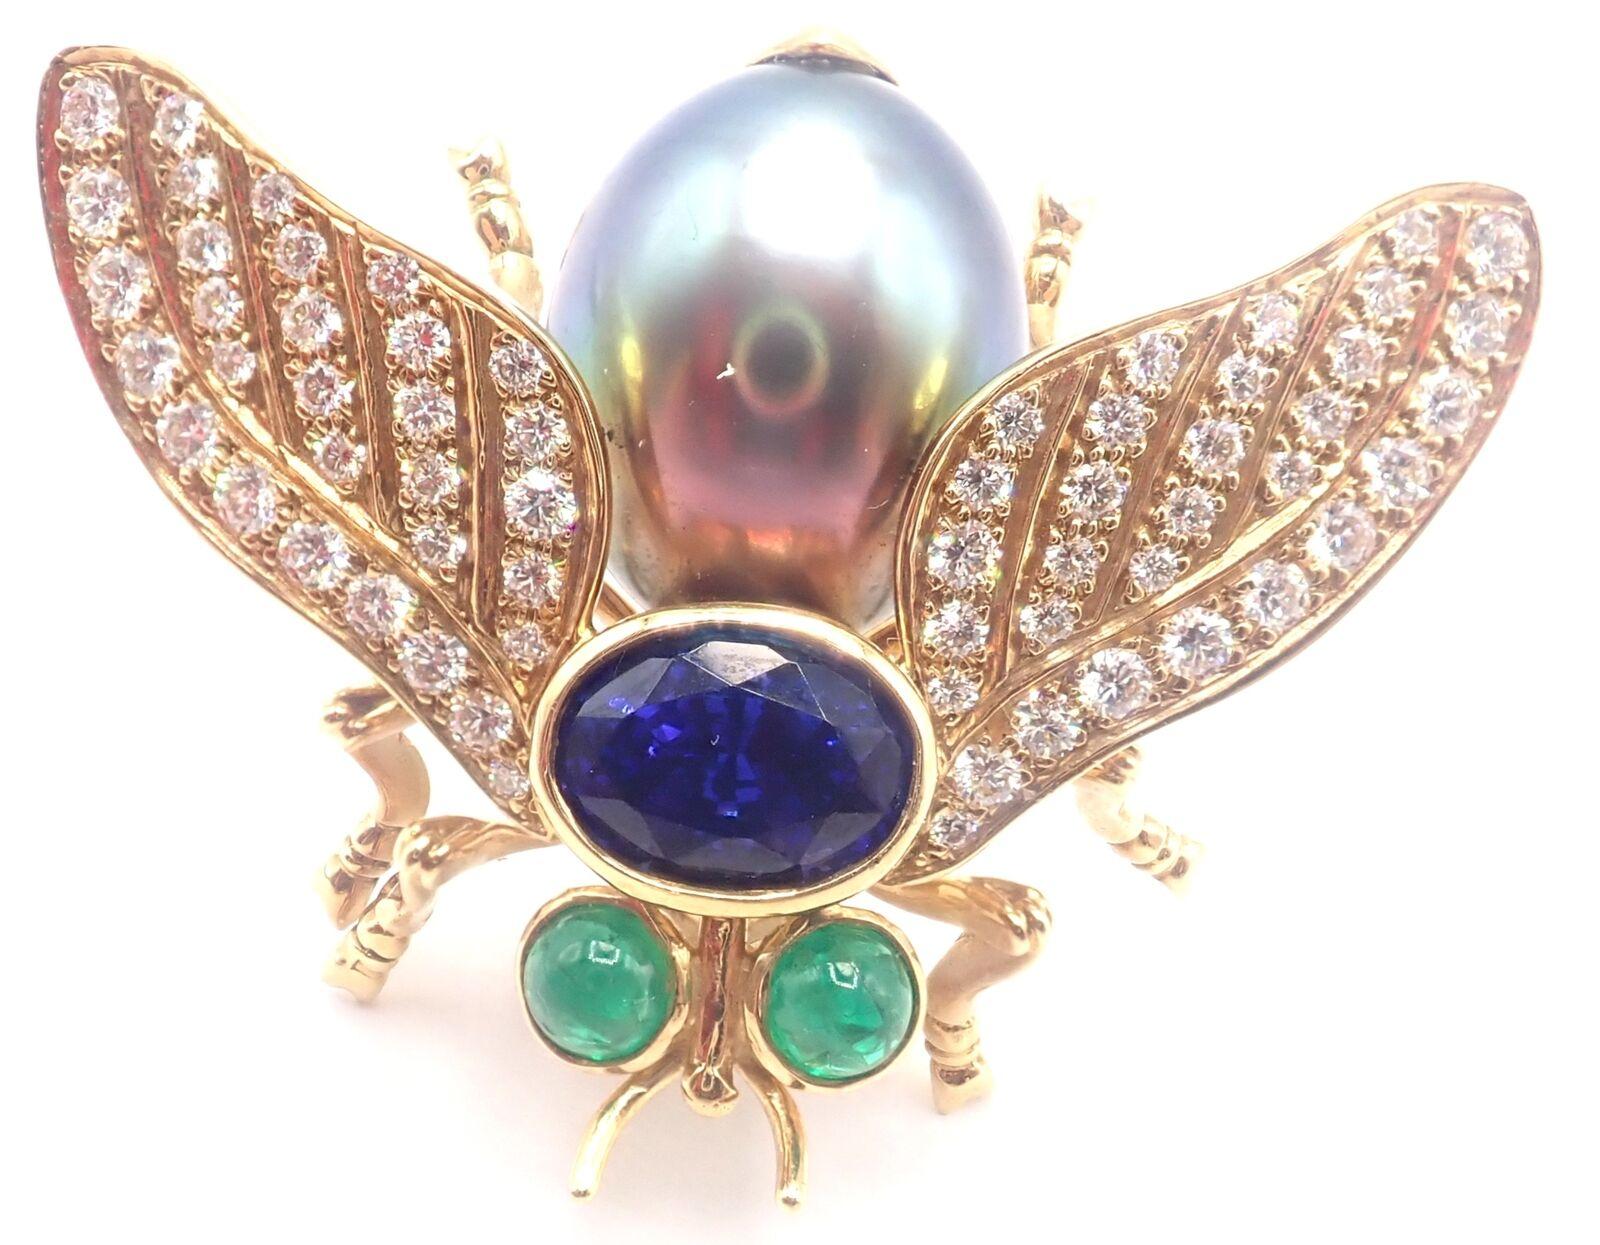 18k Yellow Gold Diamond Tahitian Pearl Tanzanite Emerald Fly  Brooch Pins by Tiffany & Co. 
With 62 round brilliant cut diamonds VS1 clarity, G color total weight approximately .75ct
2 Cabochon emeralds
Tahitian pearl 13mm
Details: 
Measurements: